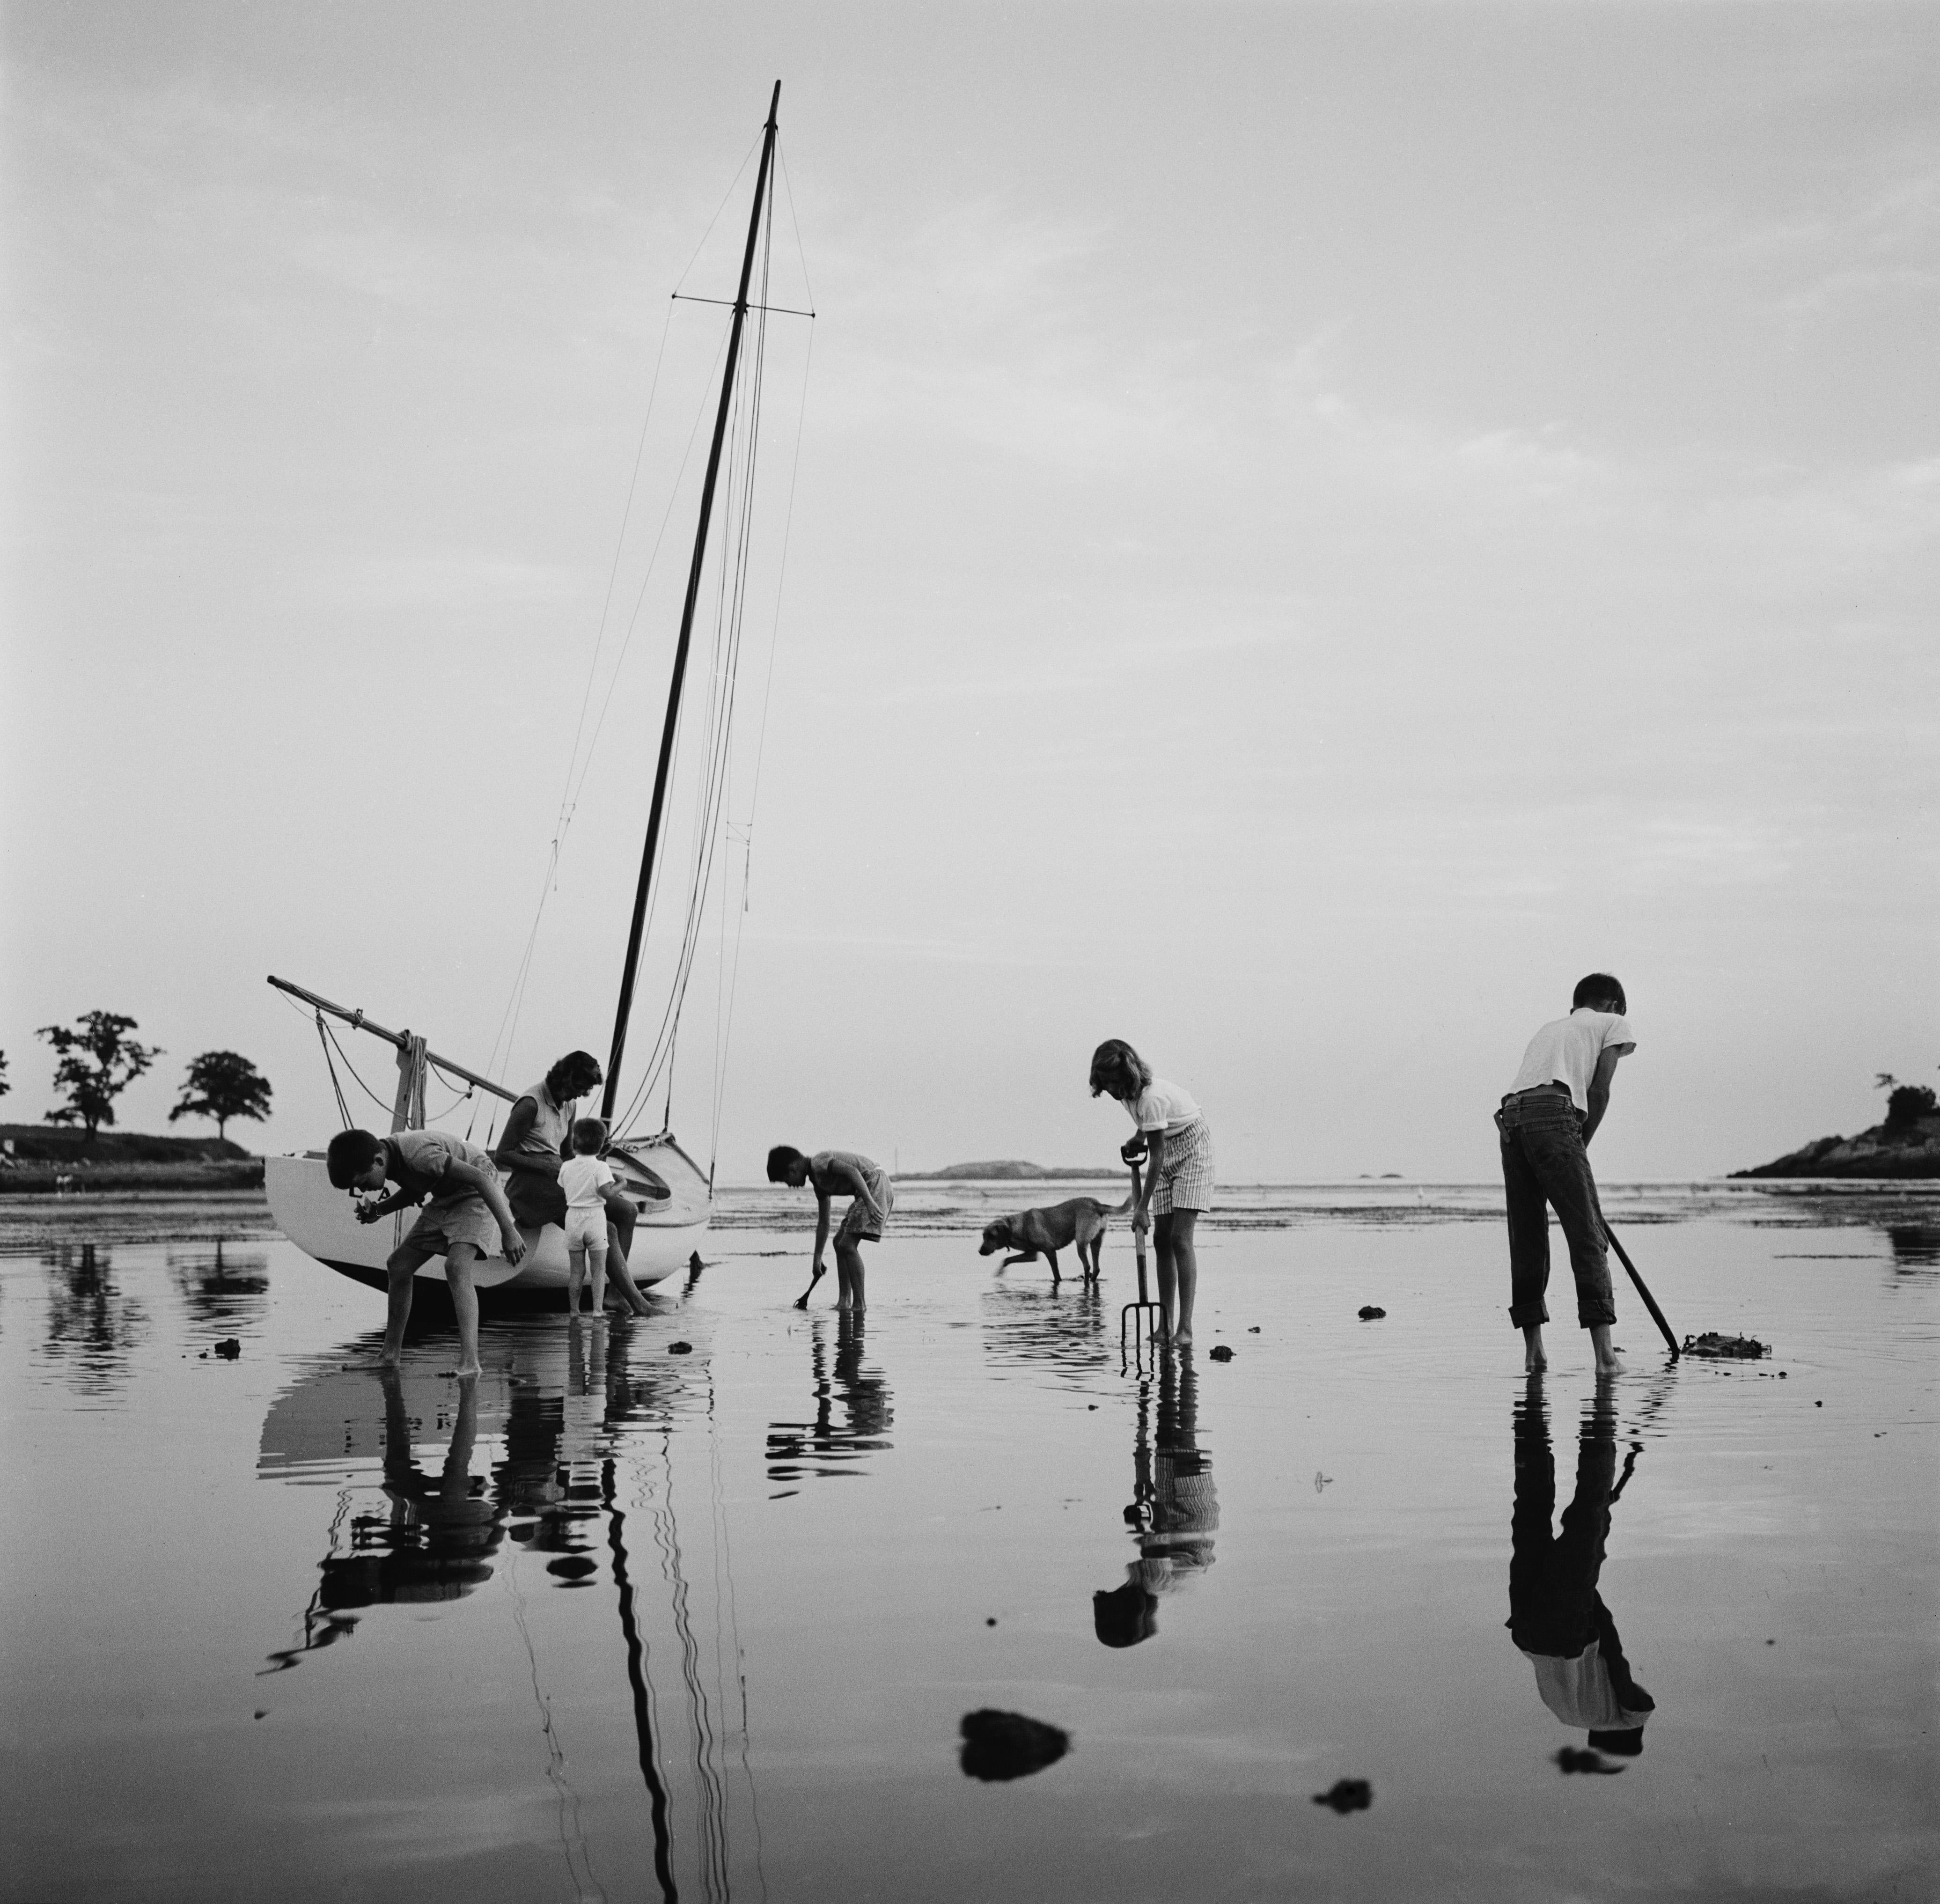 'Digging For Clams' 1960 Slim Aarons Limited Estate Edition

Mrs Hans Estin watches her children digging for clams at low tide on Black Beach, Massachusetts Bay, circa 1960. (Photo by Slim Aarons)

Silver Gelatin Fibre Print
Produced from the